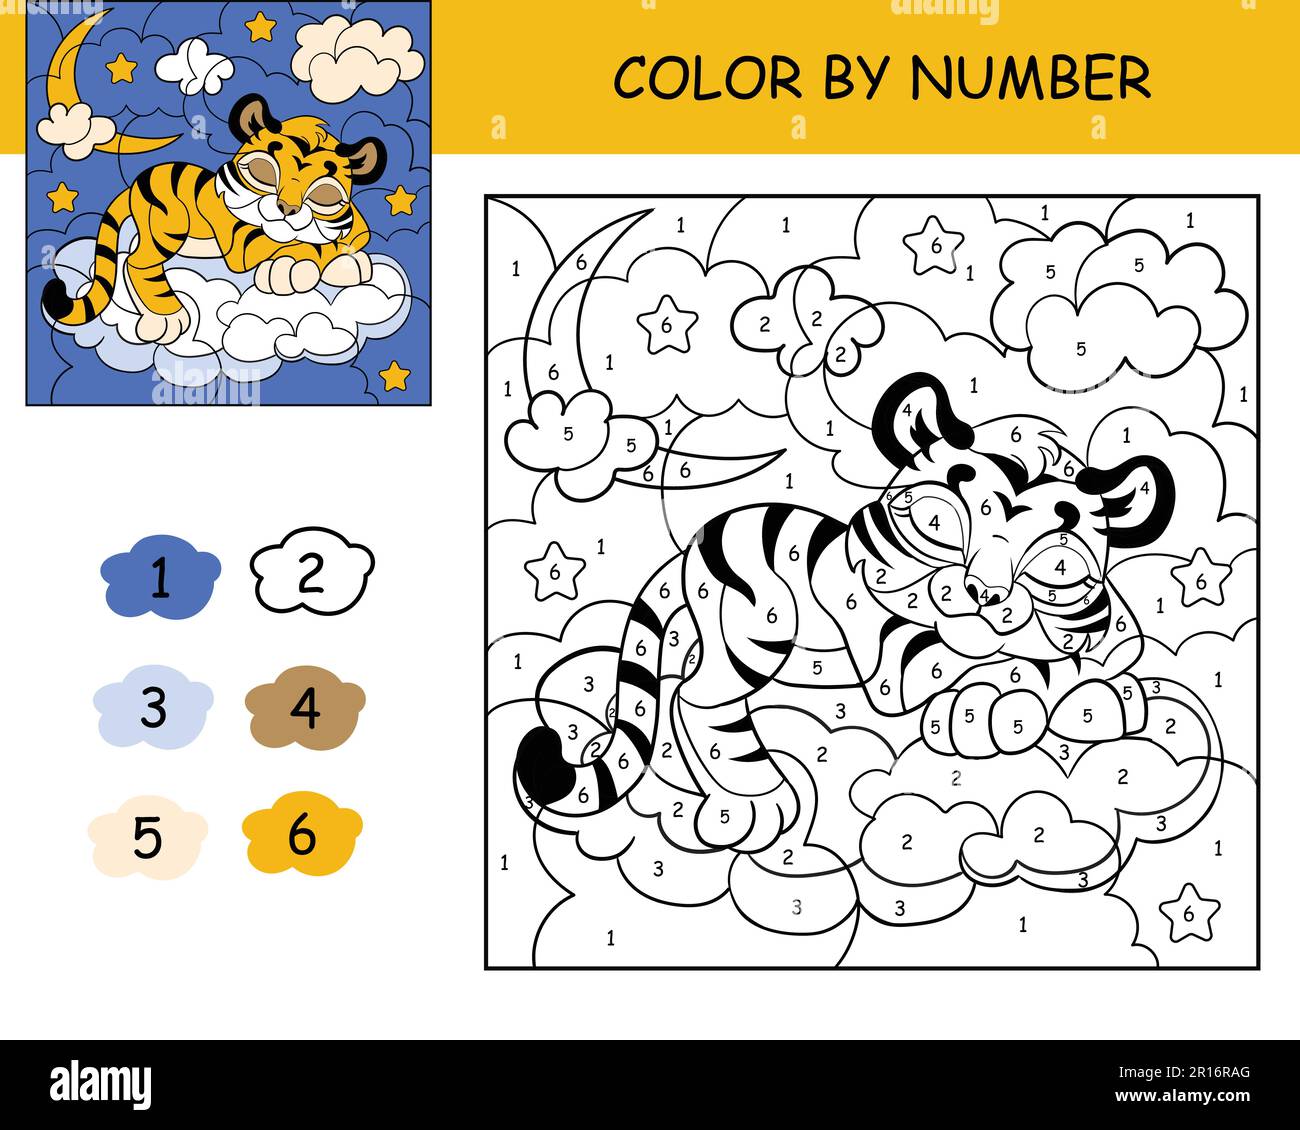 Coloring puzzle with number of color for kids with cute dreaming tiger. Printable coloring page for kids leisure. Black and white picture with color i Stock Vector